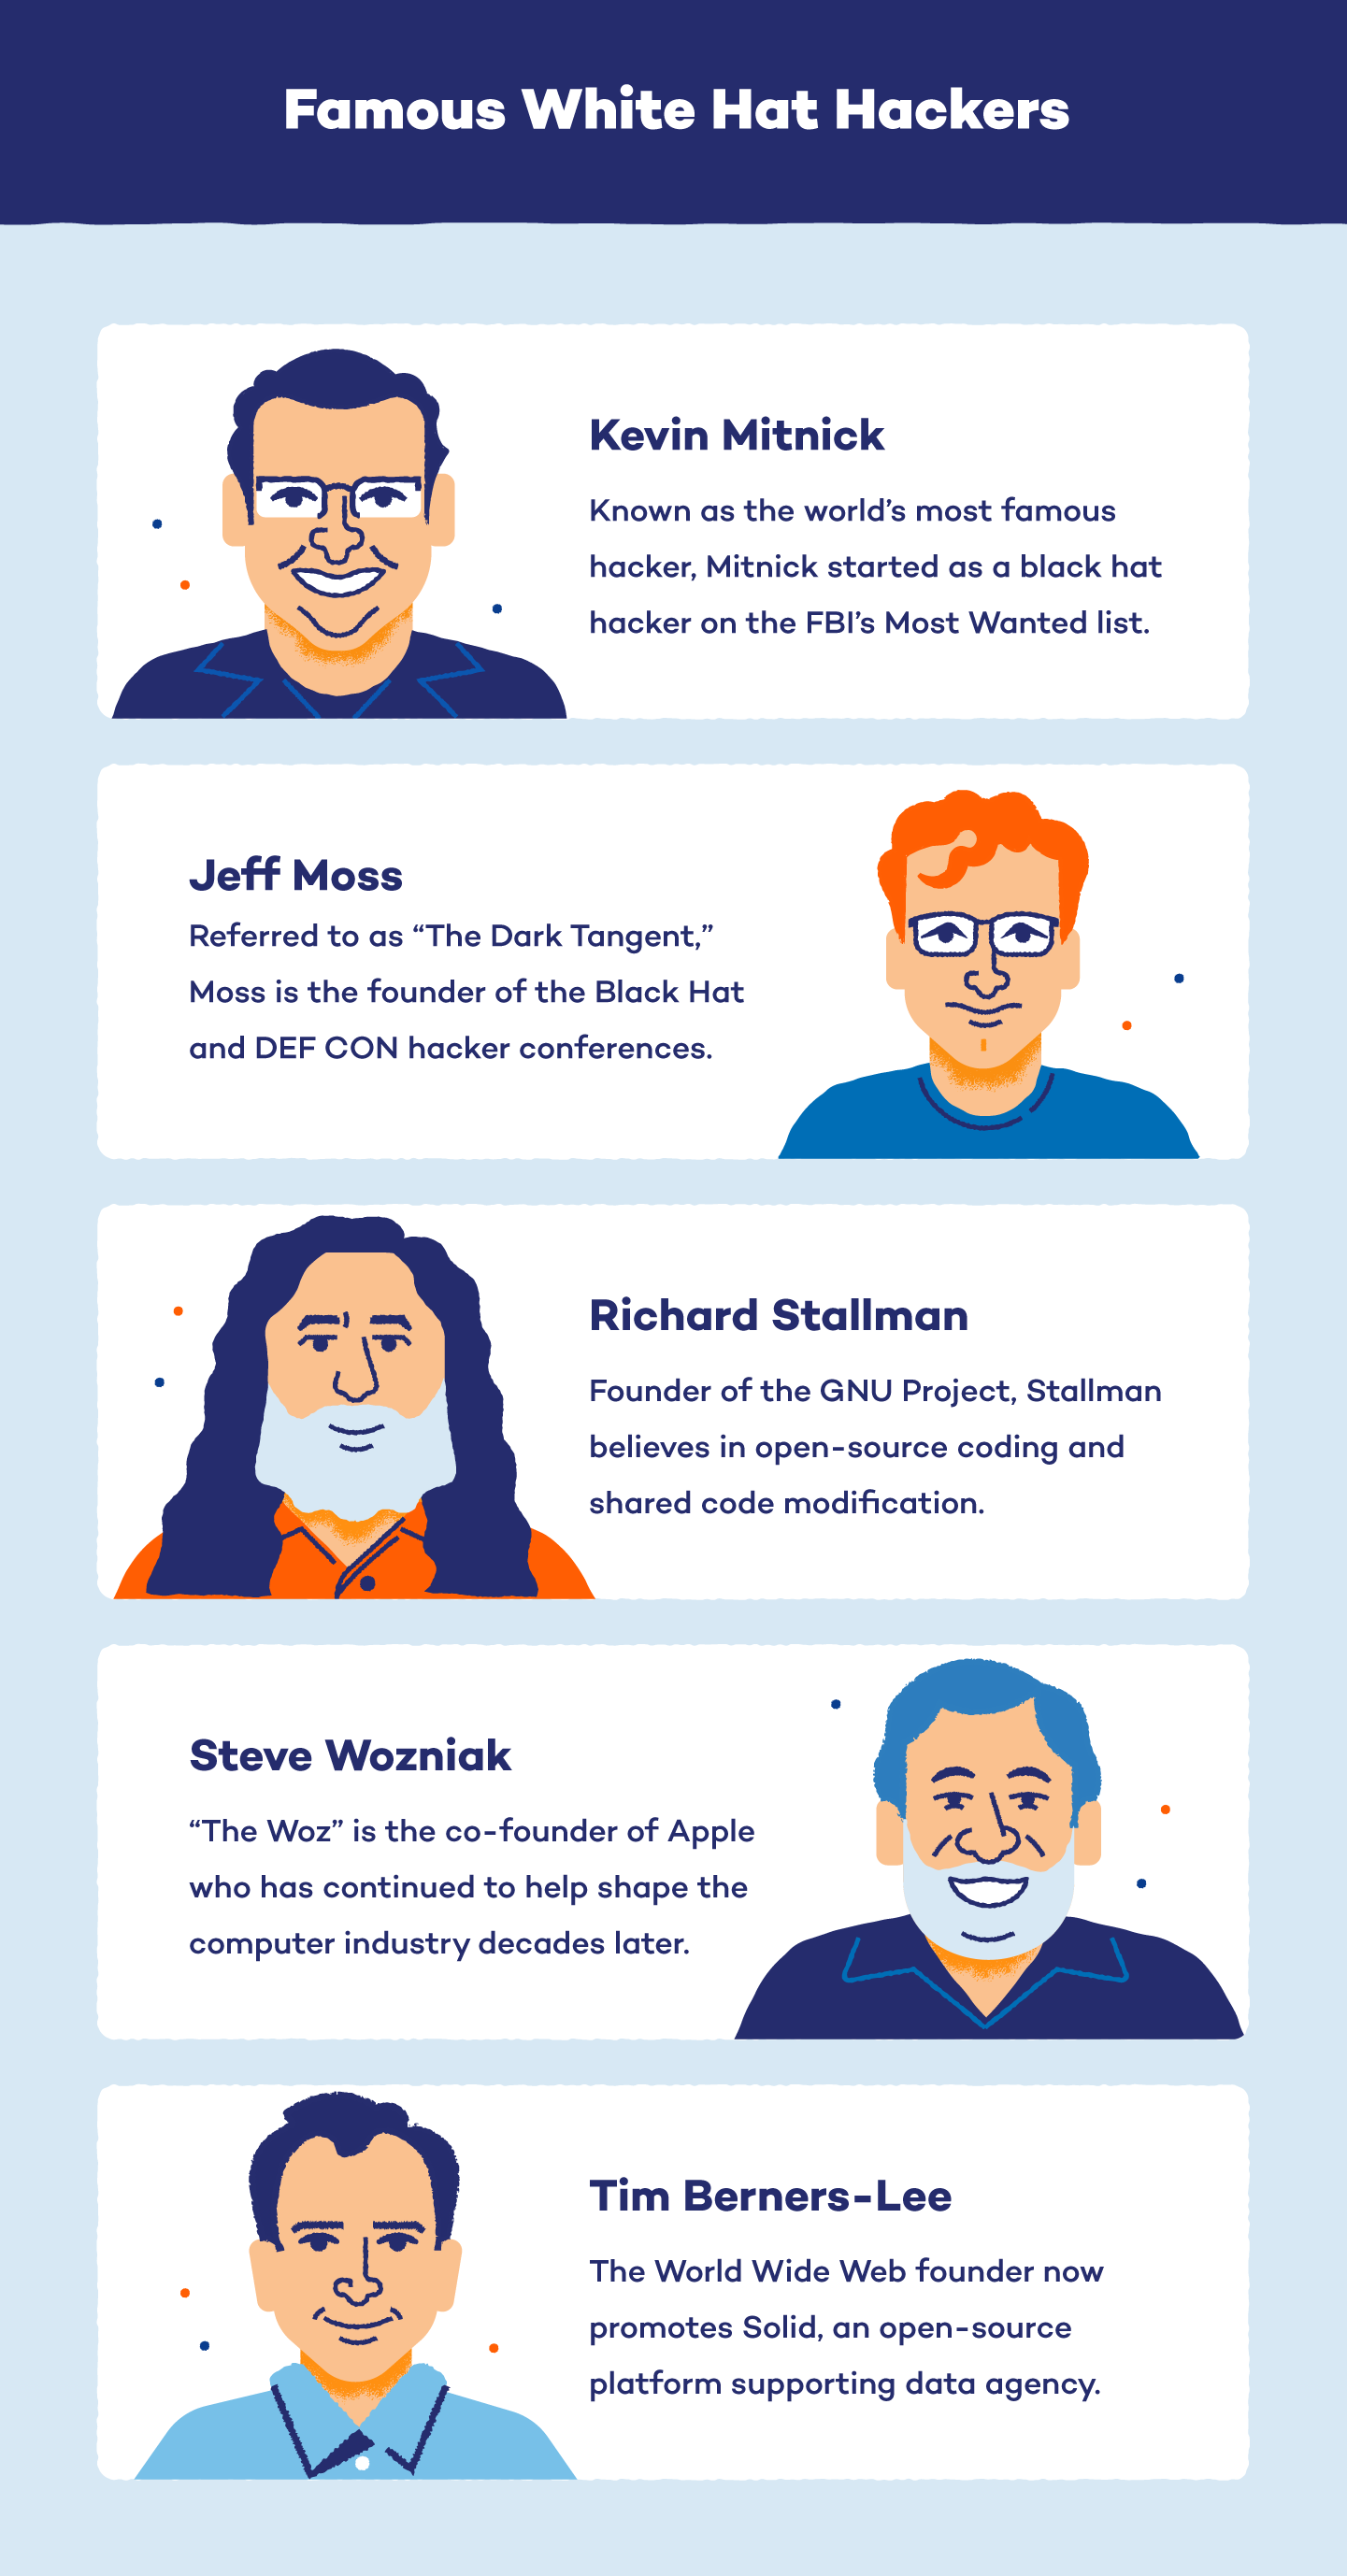 Illustrations of 5 famous white hat hackers.